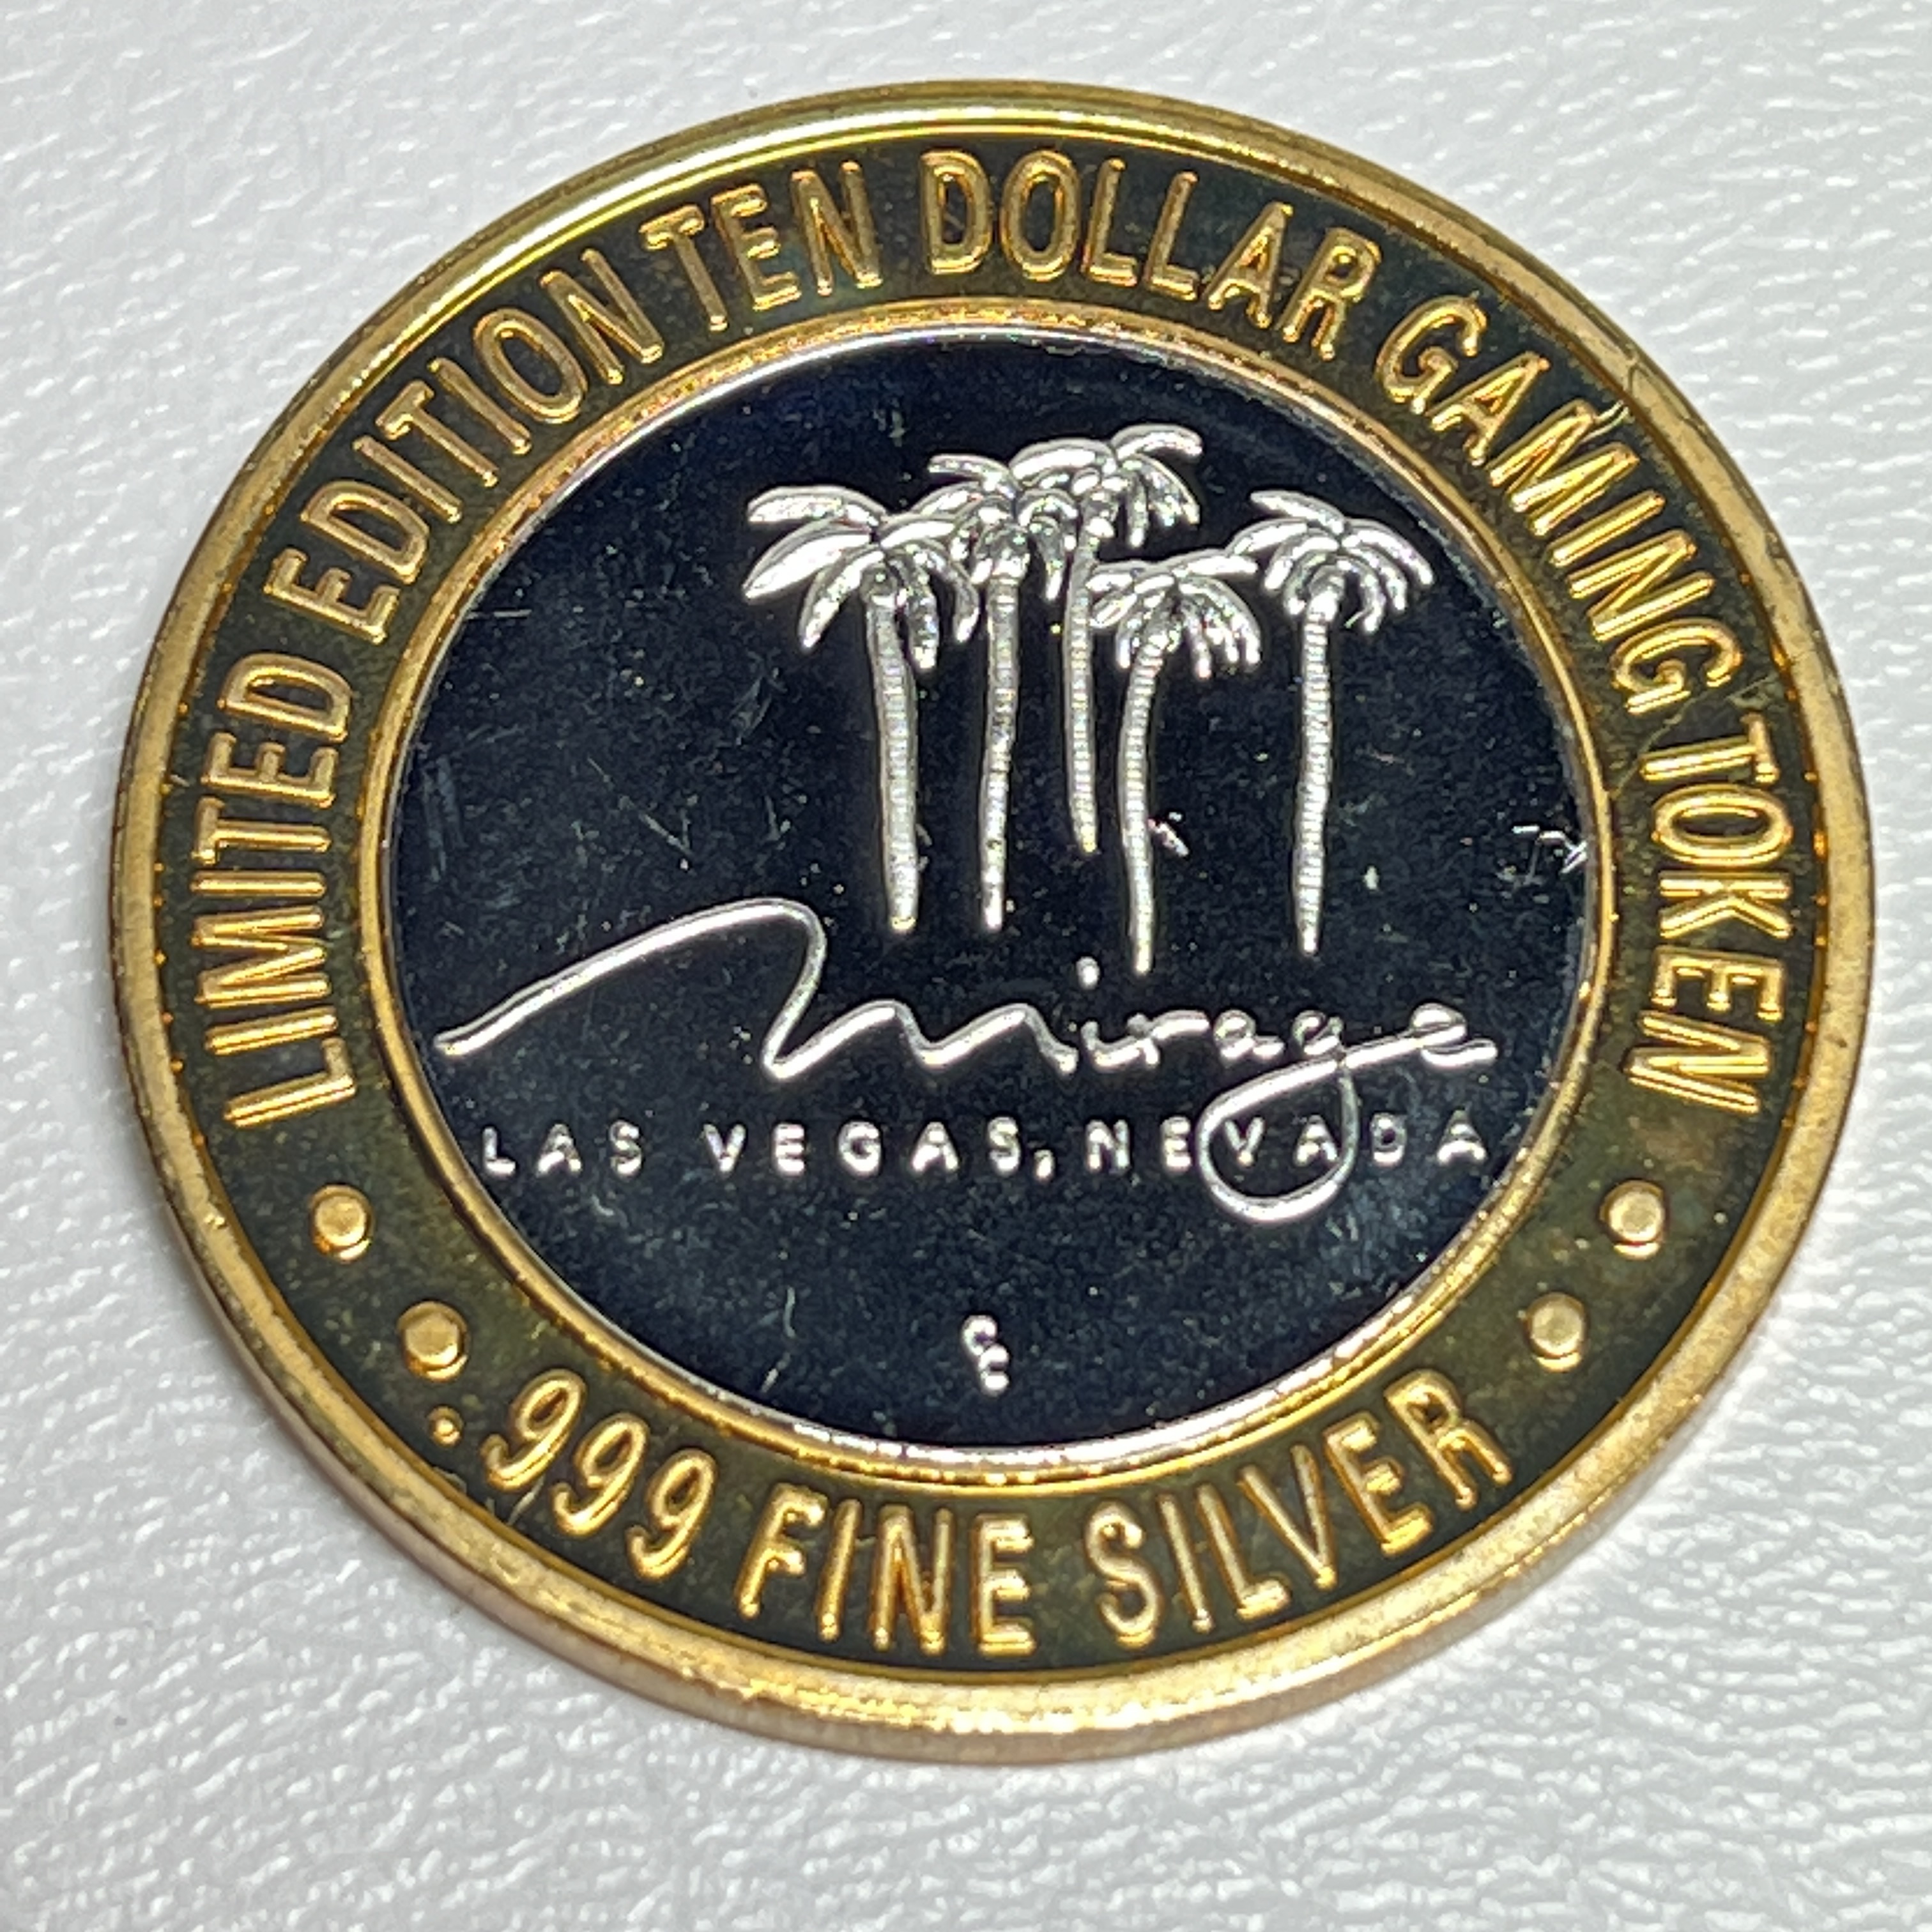 Limited Edition TEN DOLLAR .999 SILVER Gaming Coin Token From Luxor Casino